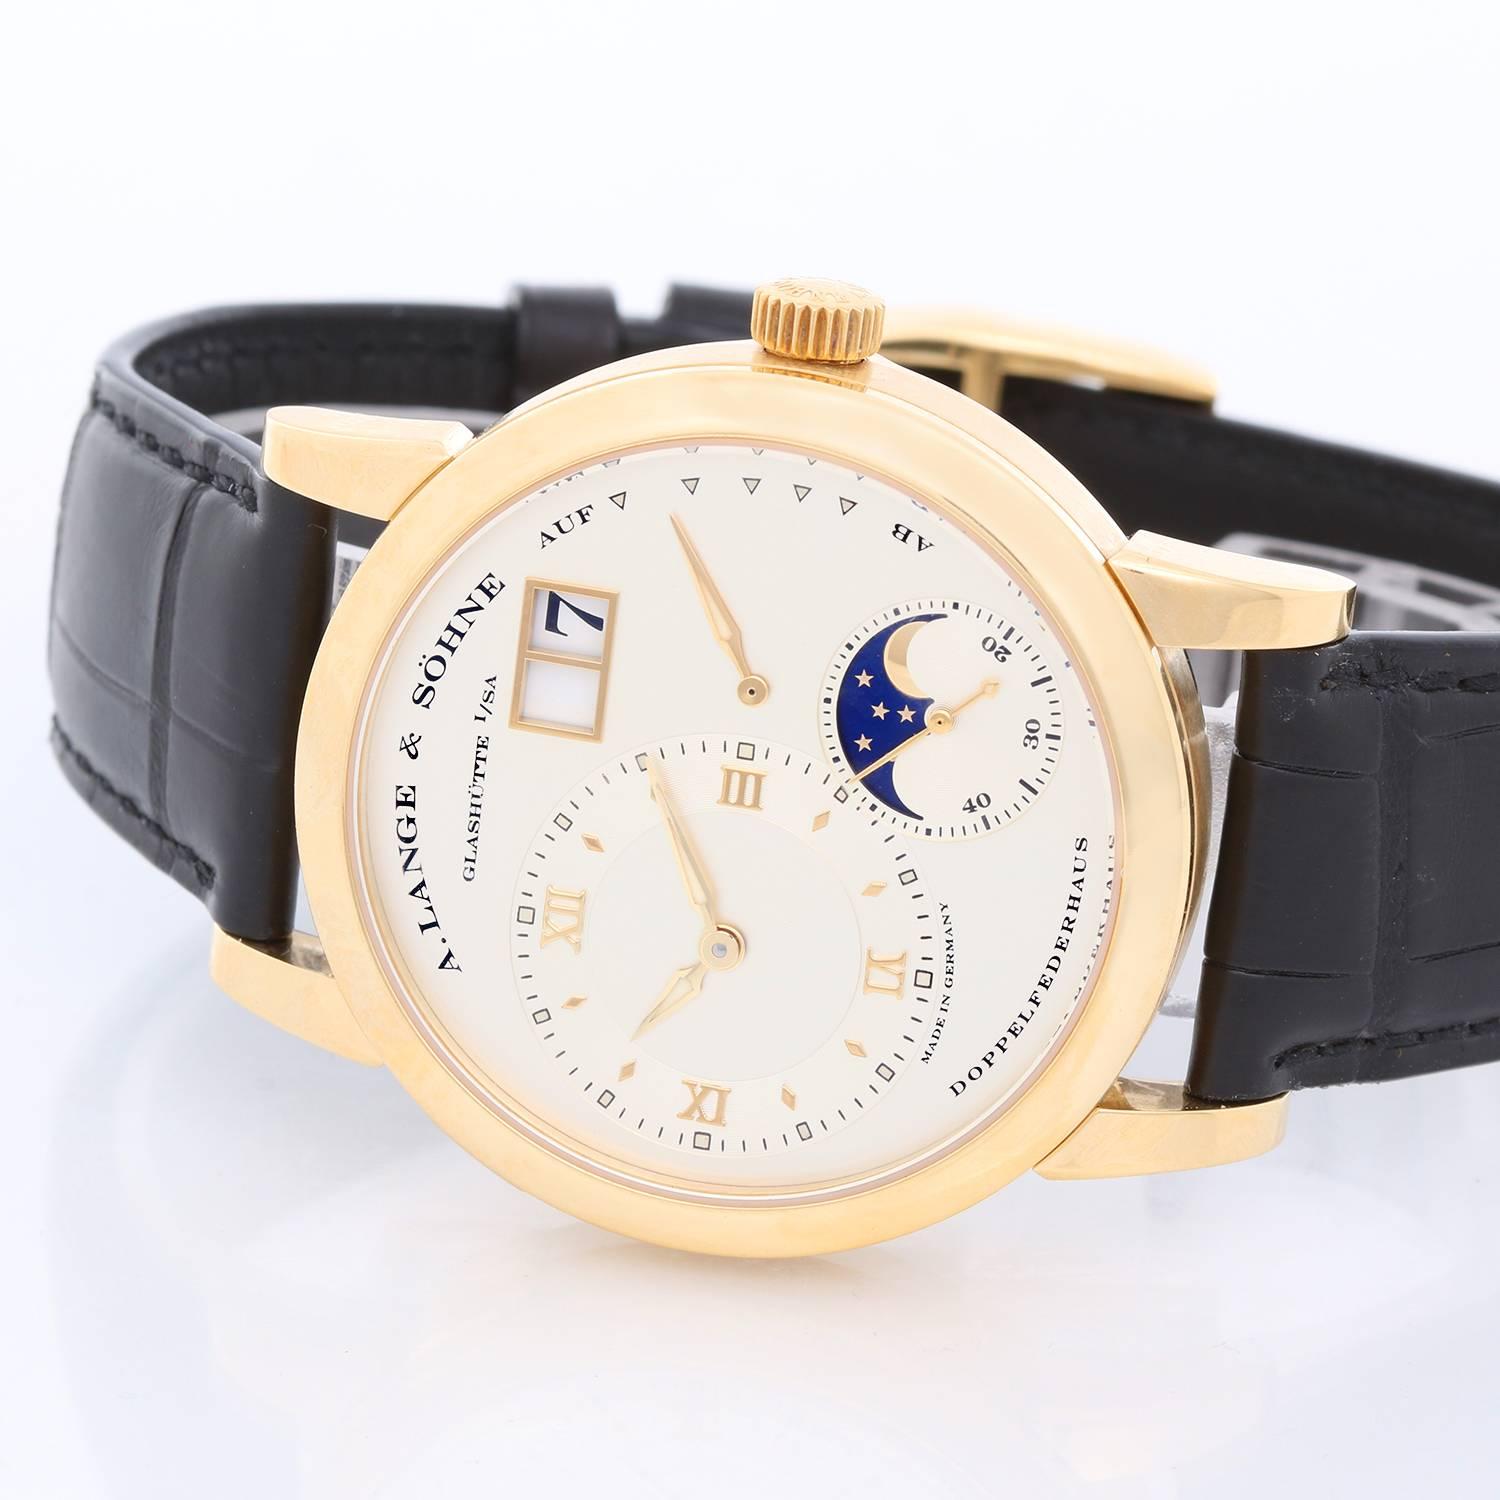 A. Lange & Sohne Lange 1 Moonphase Yellow Gold 109.021 -  Mechanical winding. 18K Yellow Gold  with a exposition back ( 38.5 mm ). Silver dial with gold hands; two sub dials with a large date. Black leather strap band with buckle. Pre-owned with A.